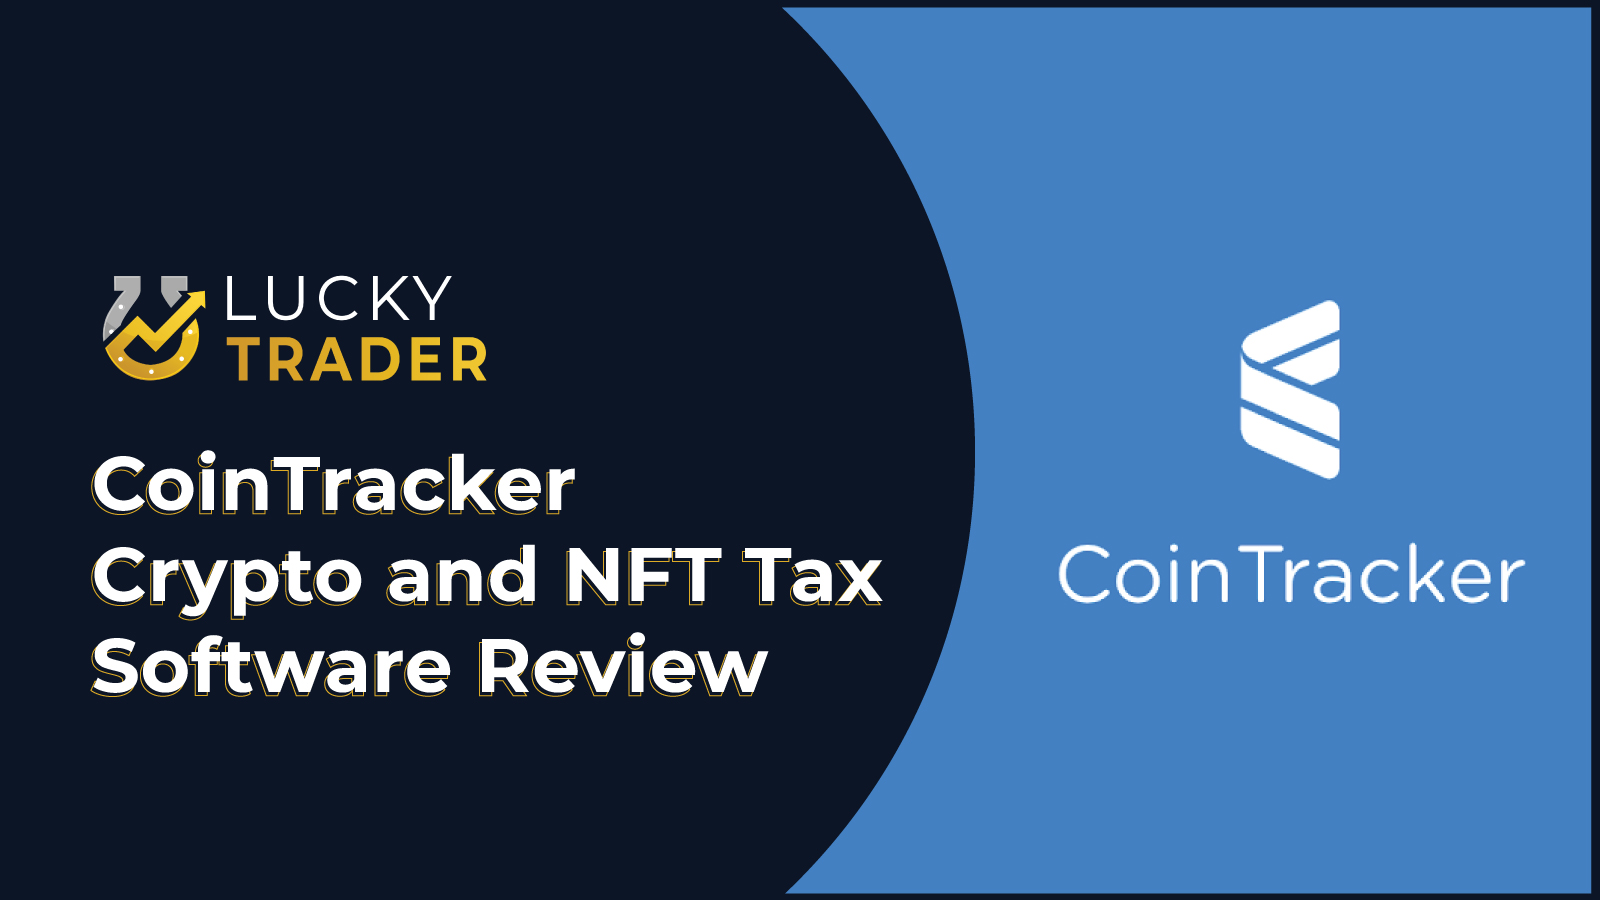 CoinTracker Cryptocurrency and NFT Tax Software Review